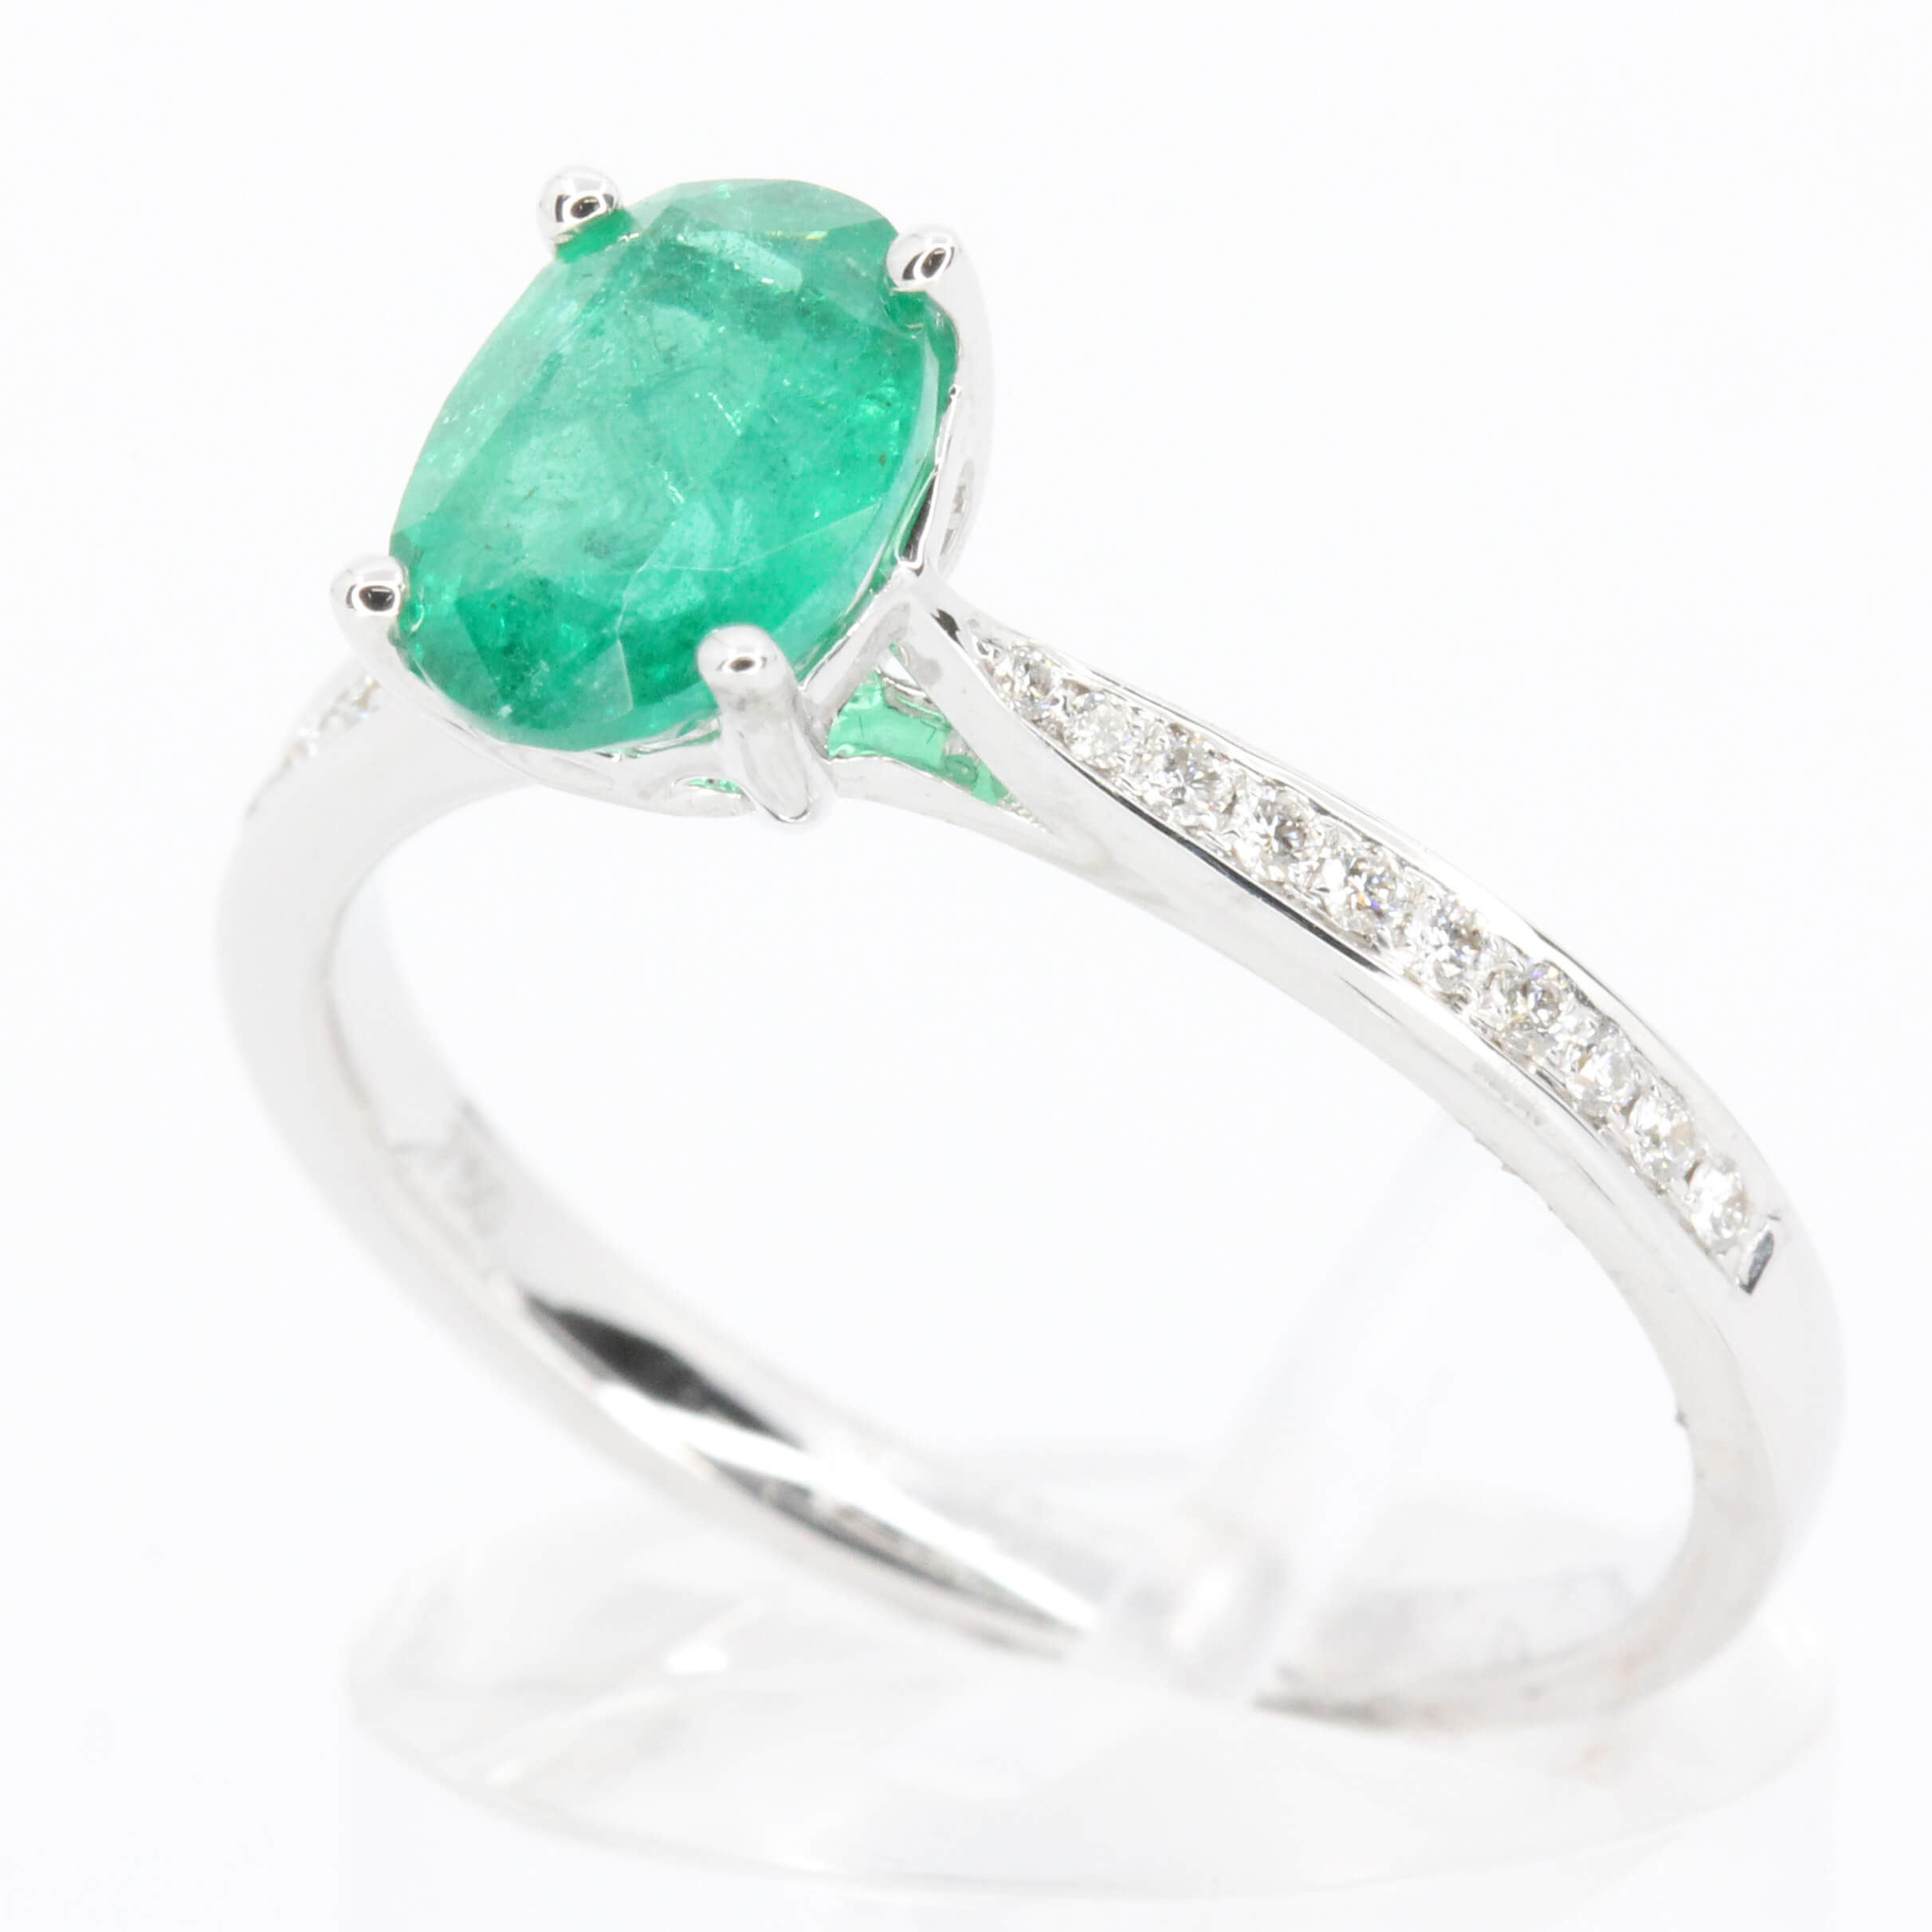 18ct White Gold Emerald and Diamonds Ring | Allgem Jewellers